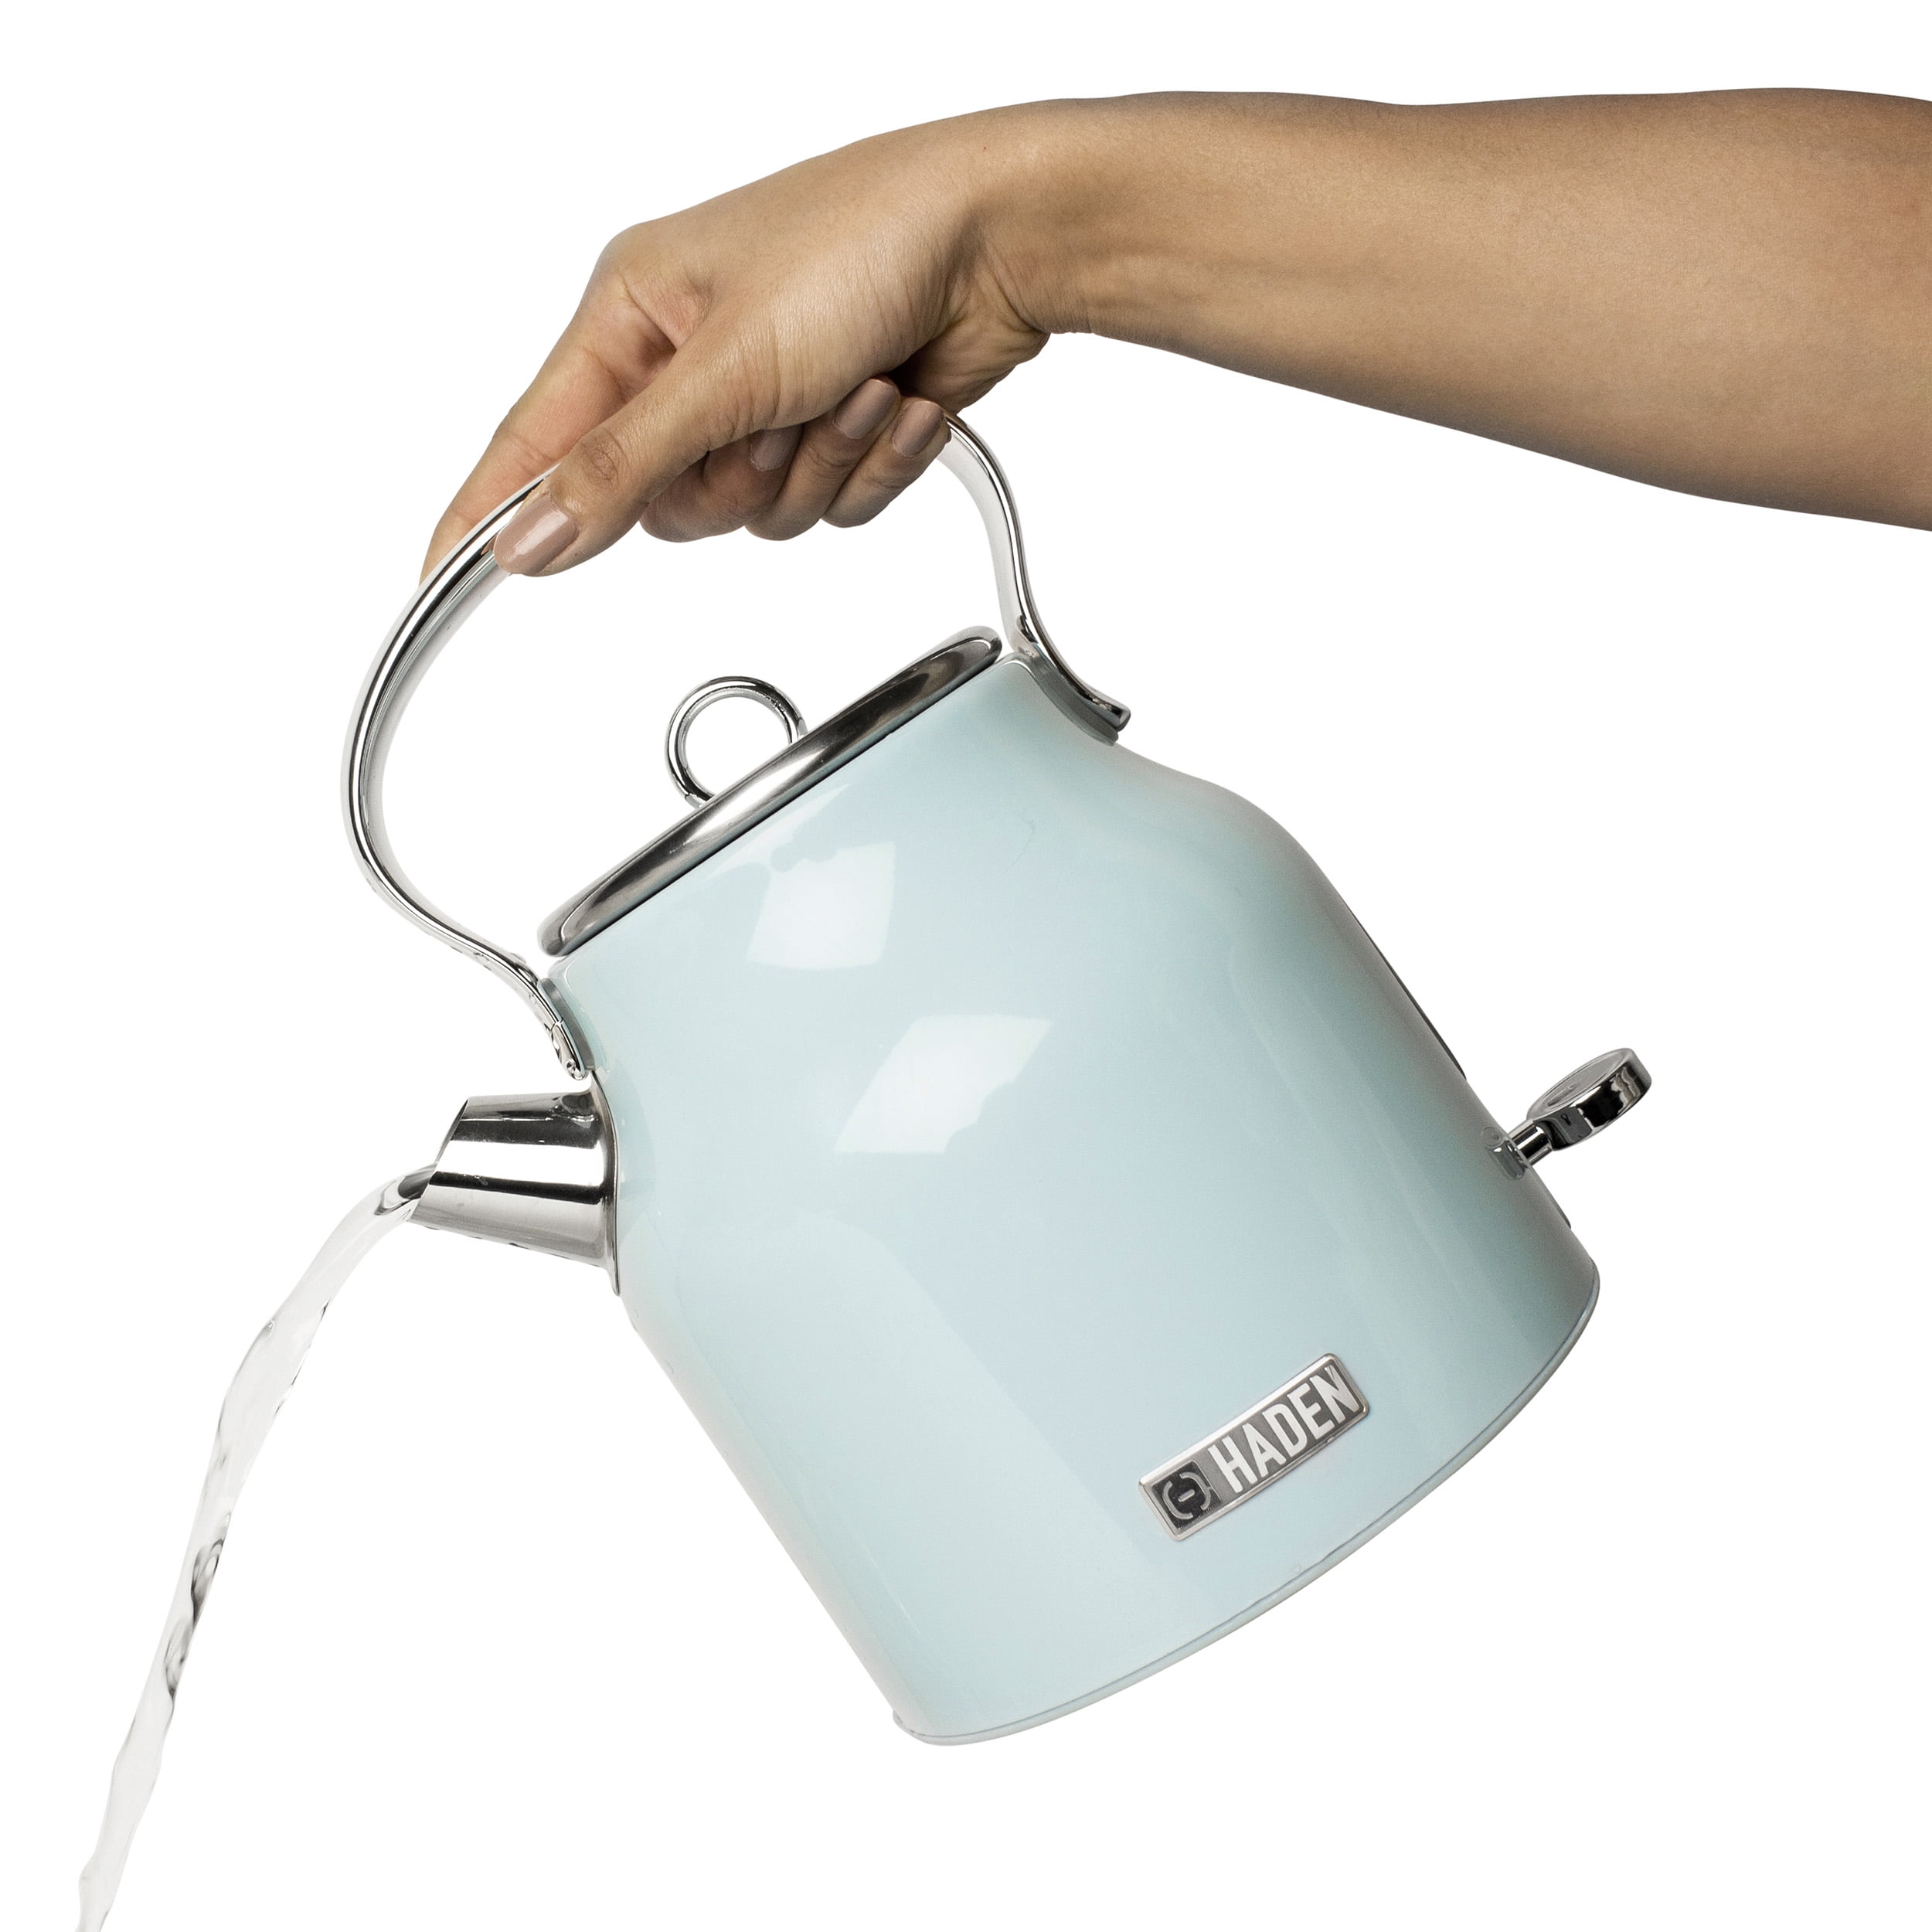 Haden Heritage 1.7 Liter Stainless Steel Electric Kettle with Toaster,  Turquoise, 1 Piece - Harris Teeter